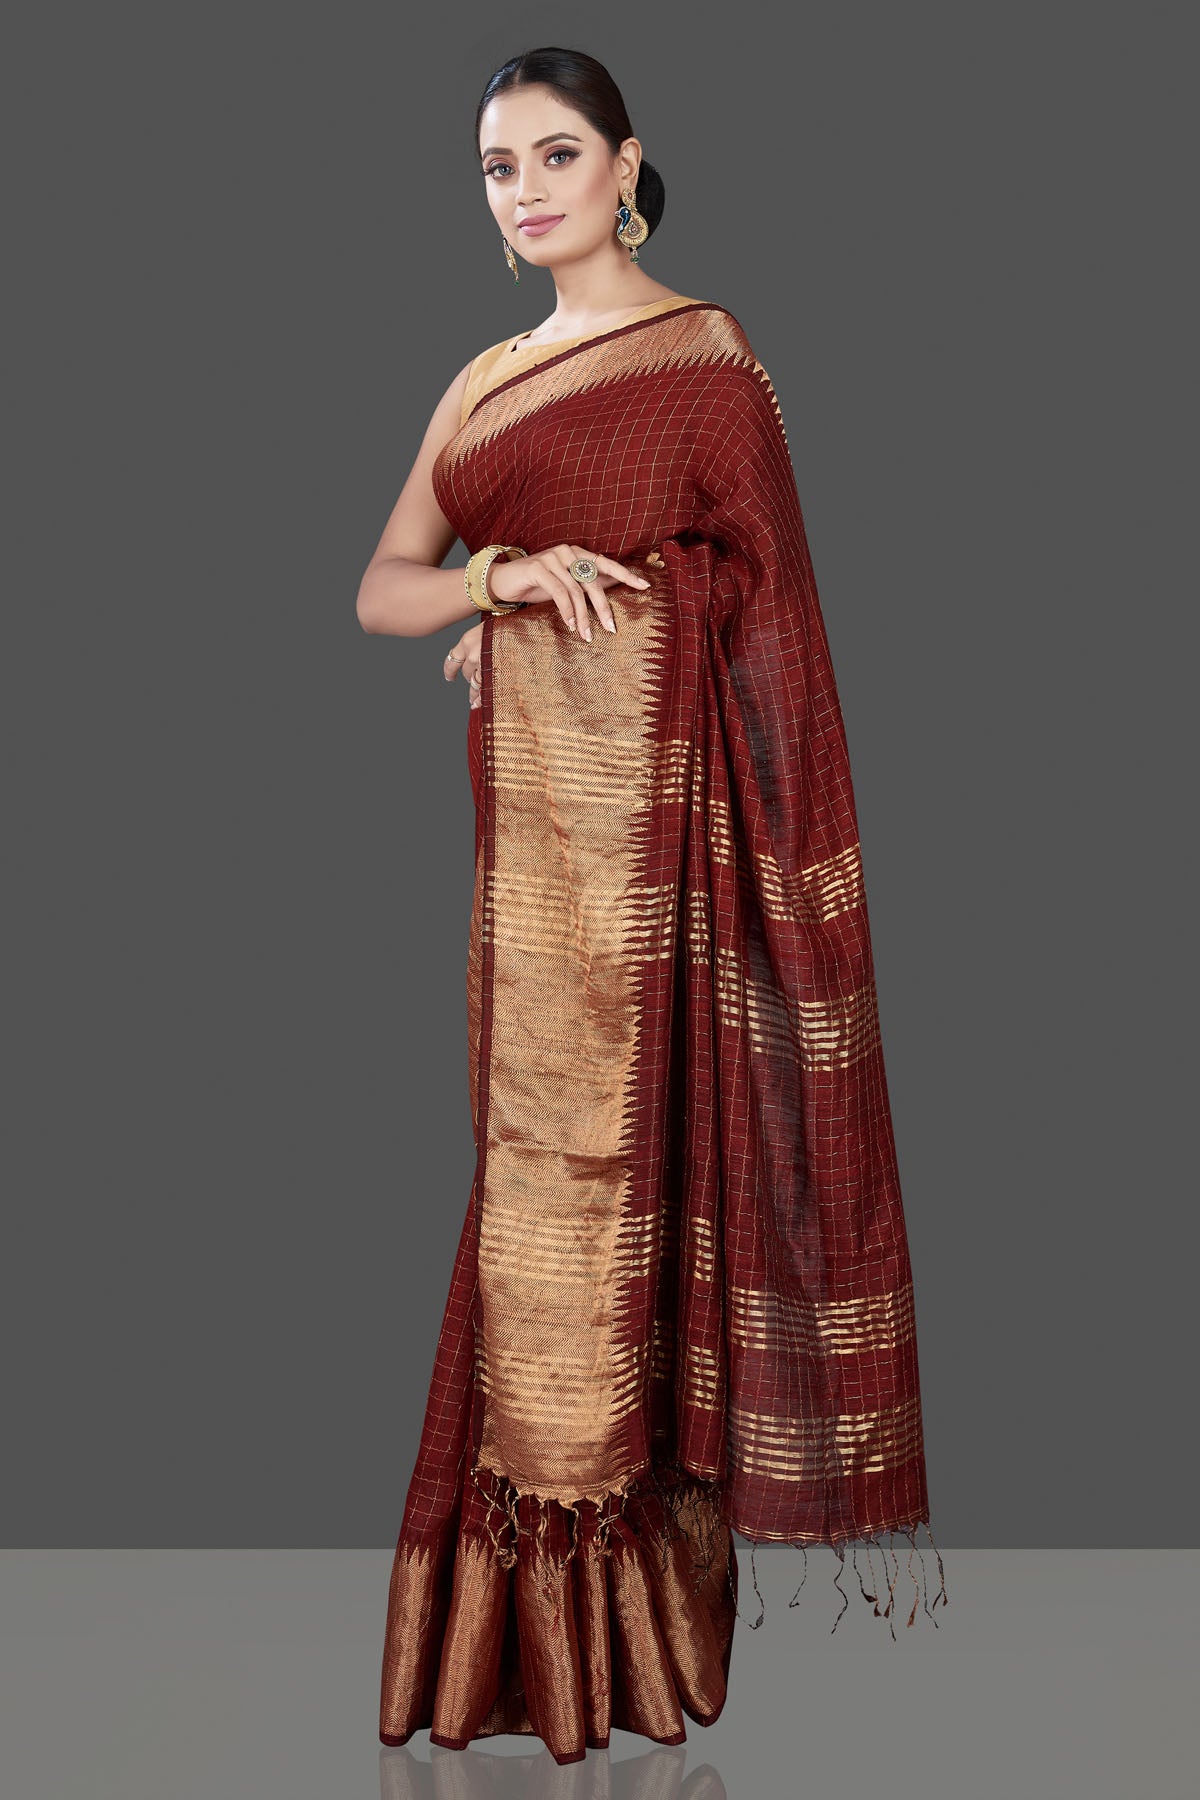 Buy stunning brown check matka silk saree online in USA with golden zari border. Be the talk of the occasion in exquisite designer sarees, pure silk sarees, tussar saris, embroidered sarees, handloom saris from Pure Elegance Indian fashion store in USA.-pallu